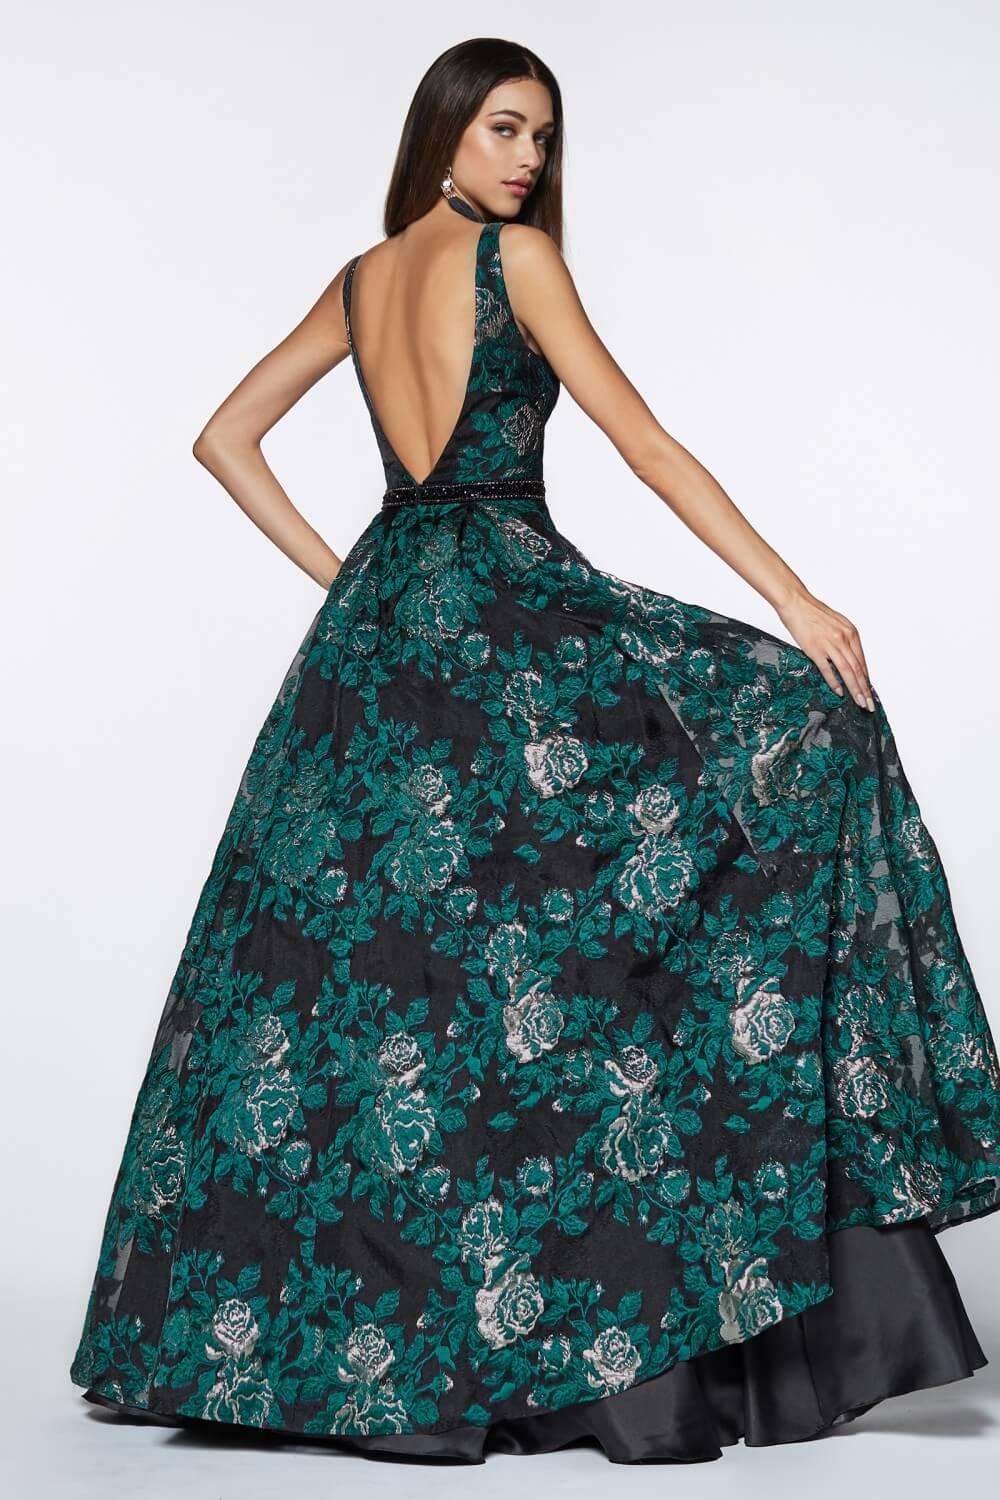 Floral Ball Gown Long Prom Dress - The Dress Outlet